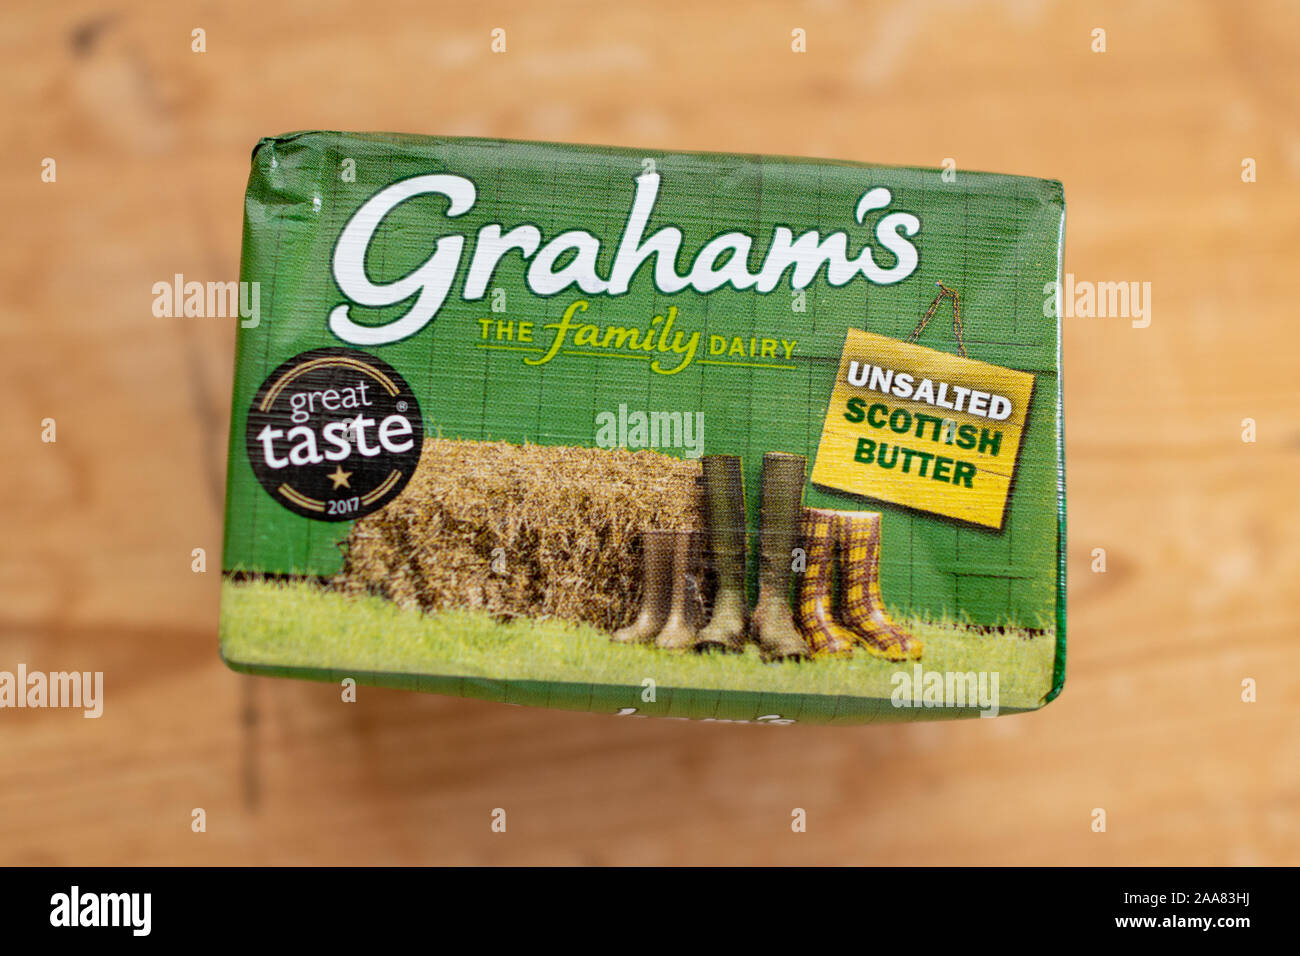 Graham's Family Dairy Unsalted Scottish Butter Stock Photo